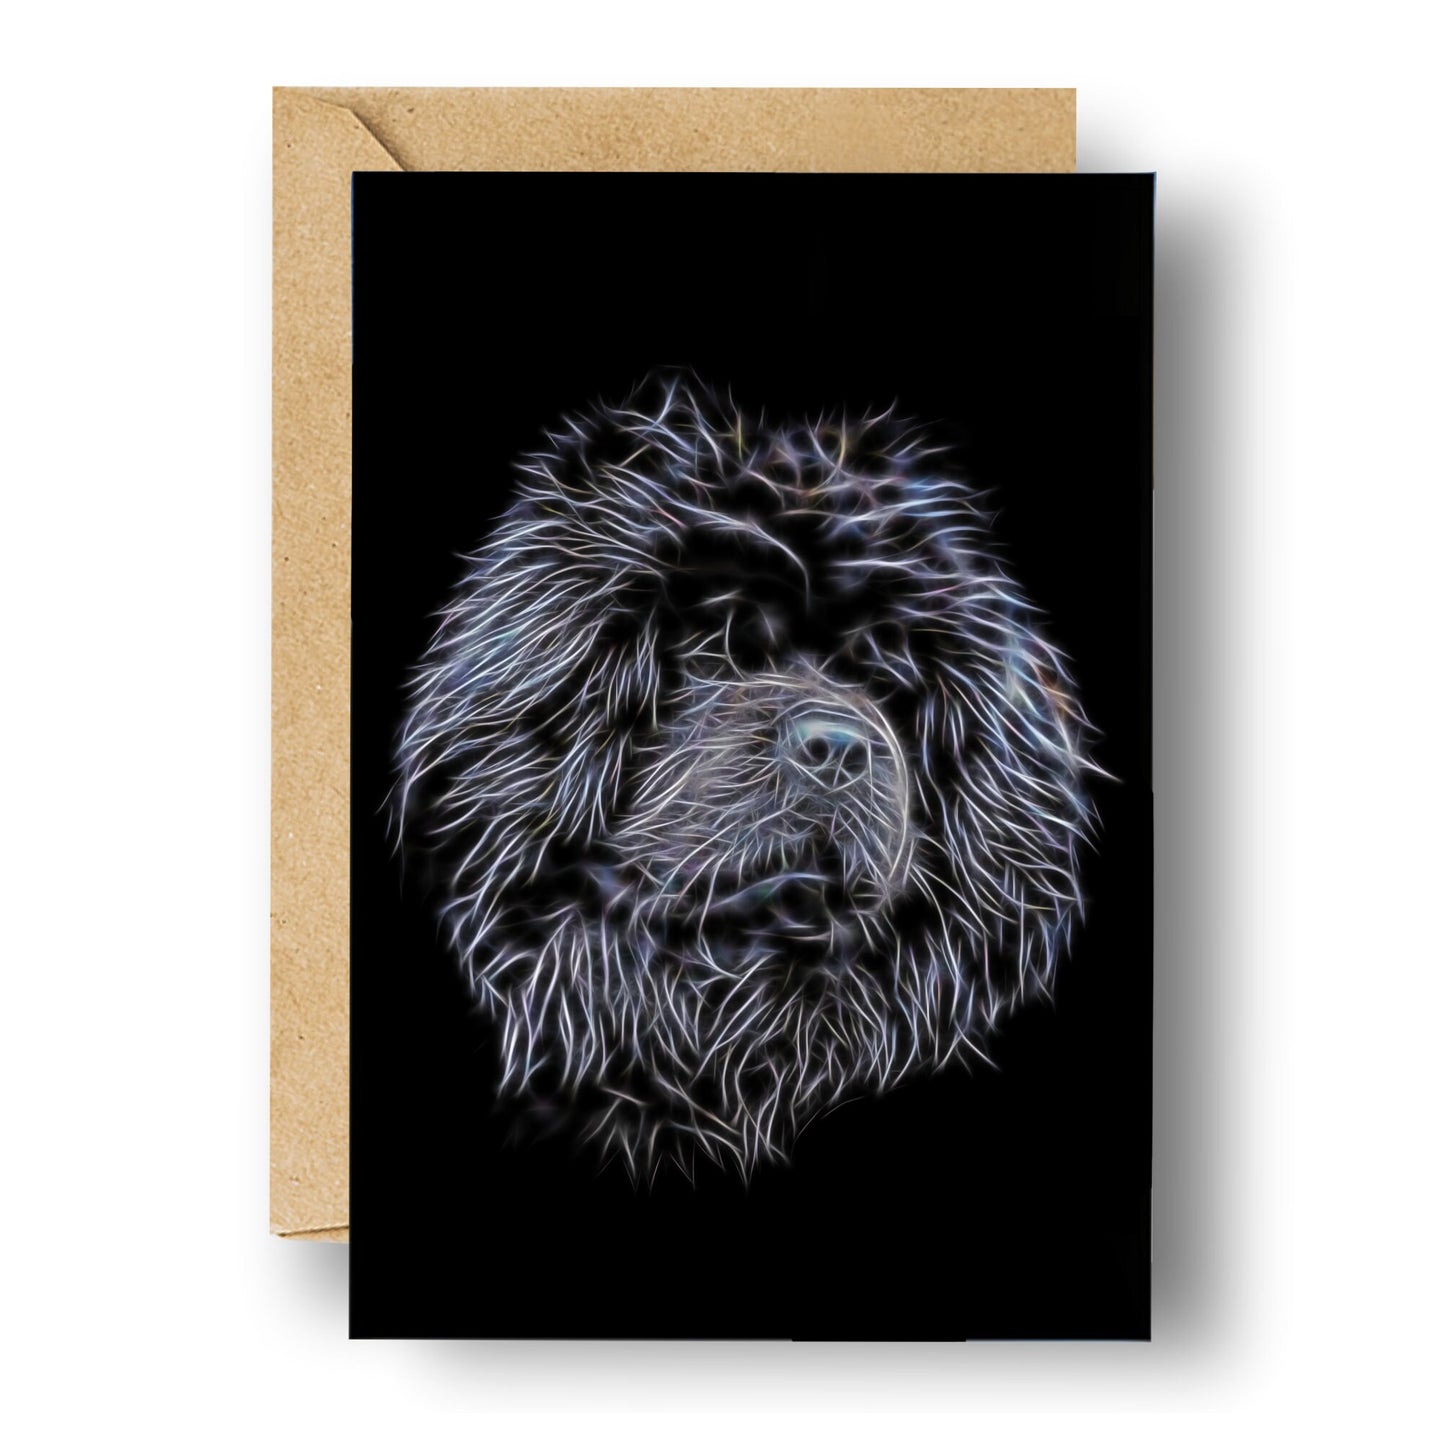 Black Chow Chow Greeting Card with Stunning Fractal Art Design. Blank Inside for Birthdays or any other Occasion